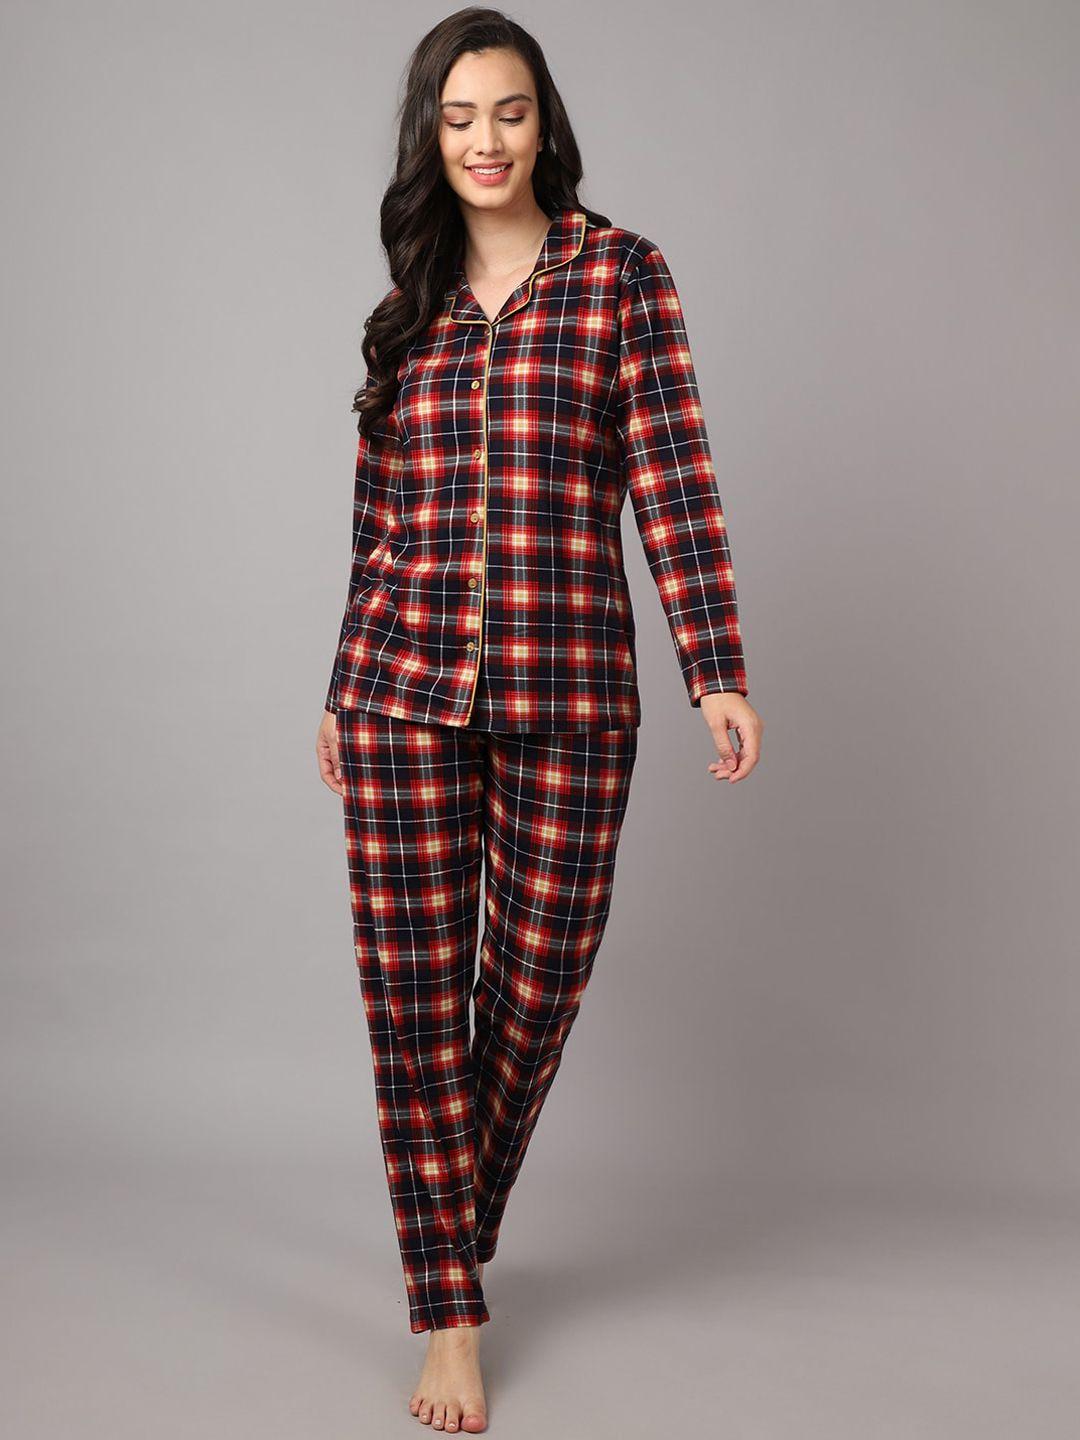 kanvin-women-navy-blue-&-red-printed-night-suit